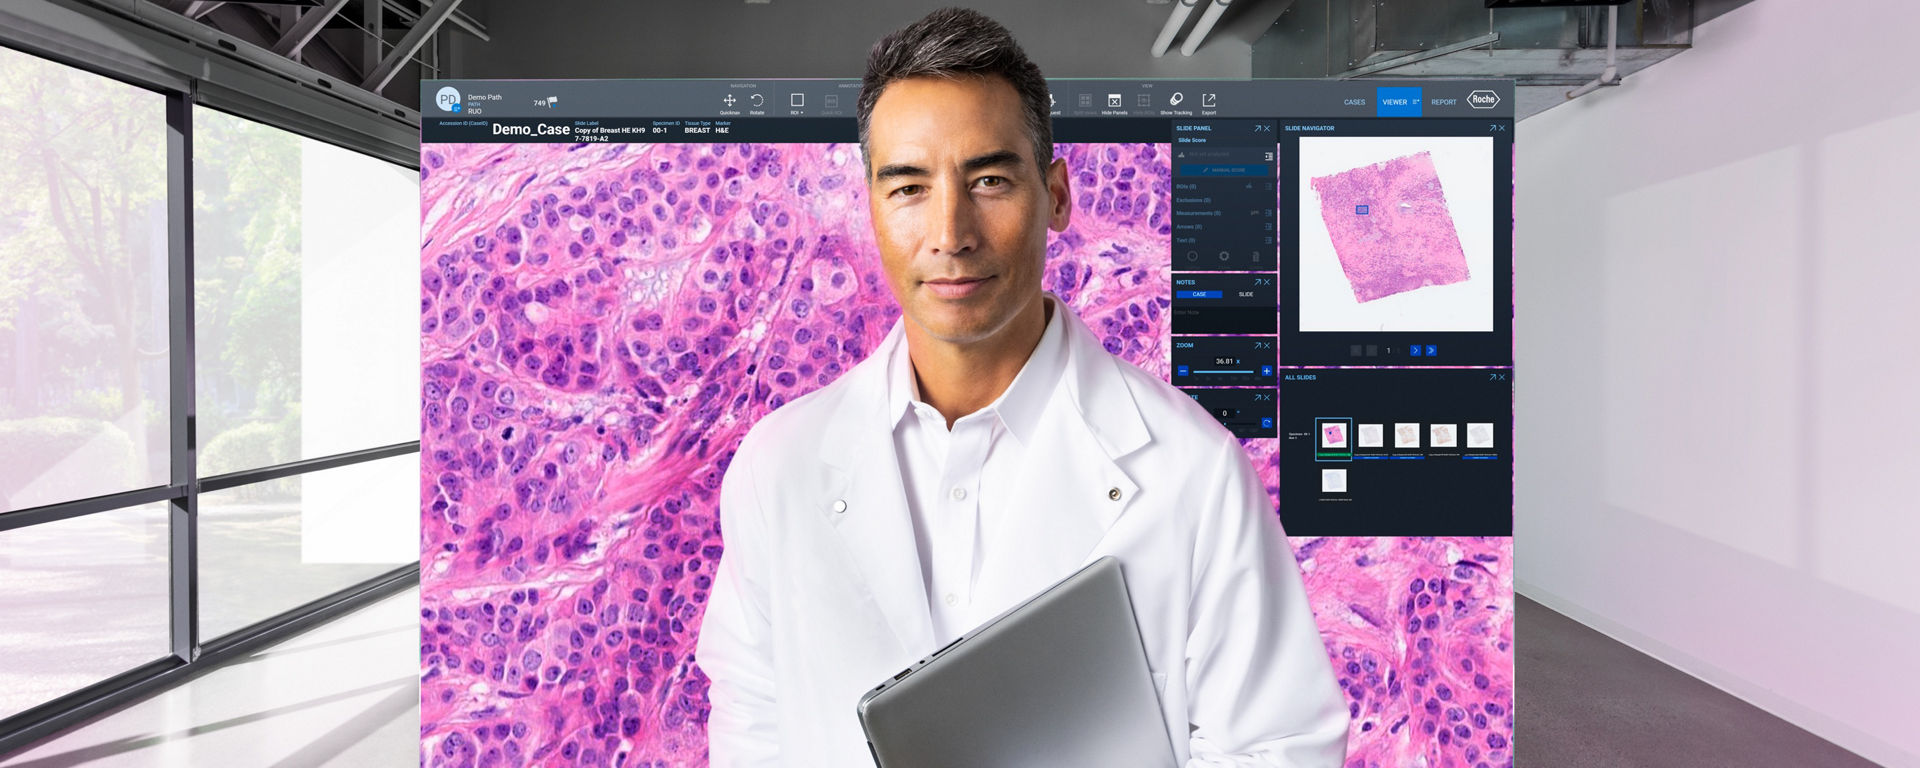 A-digital-pathologist-with-a-laptop-In-the-background-an-image-of-a-hematoxylin-and-eosin-tissue-slide